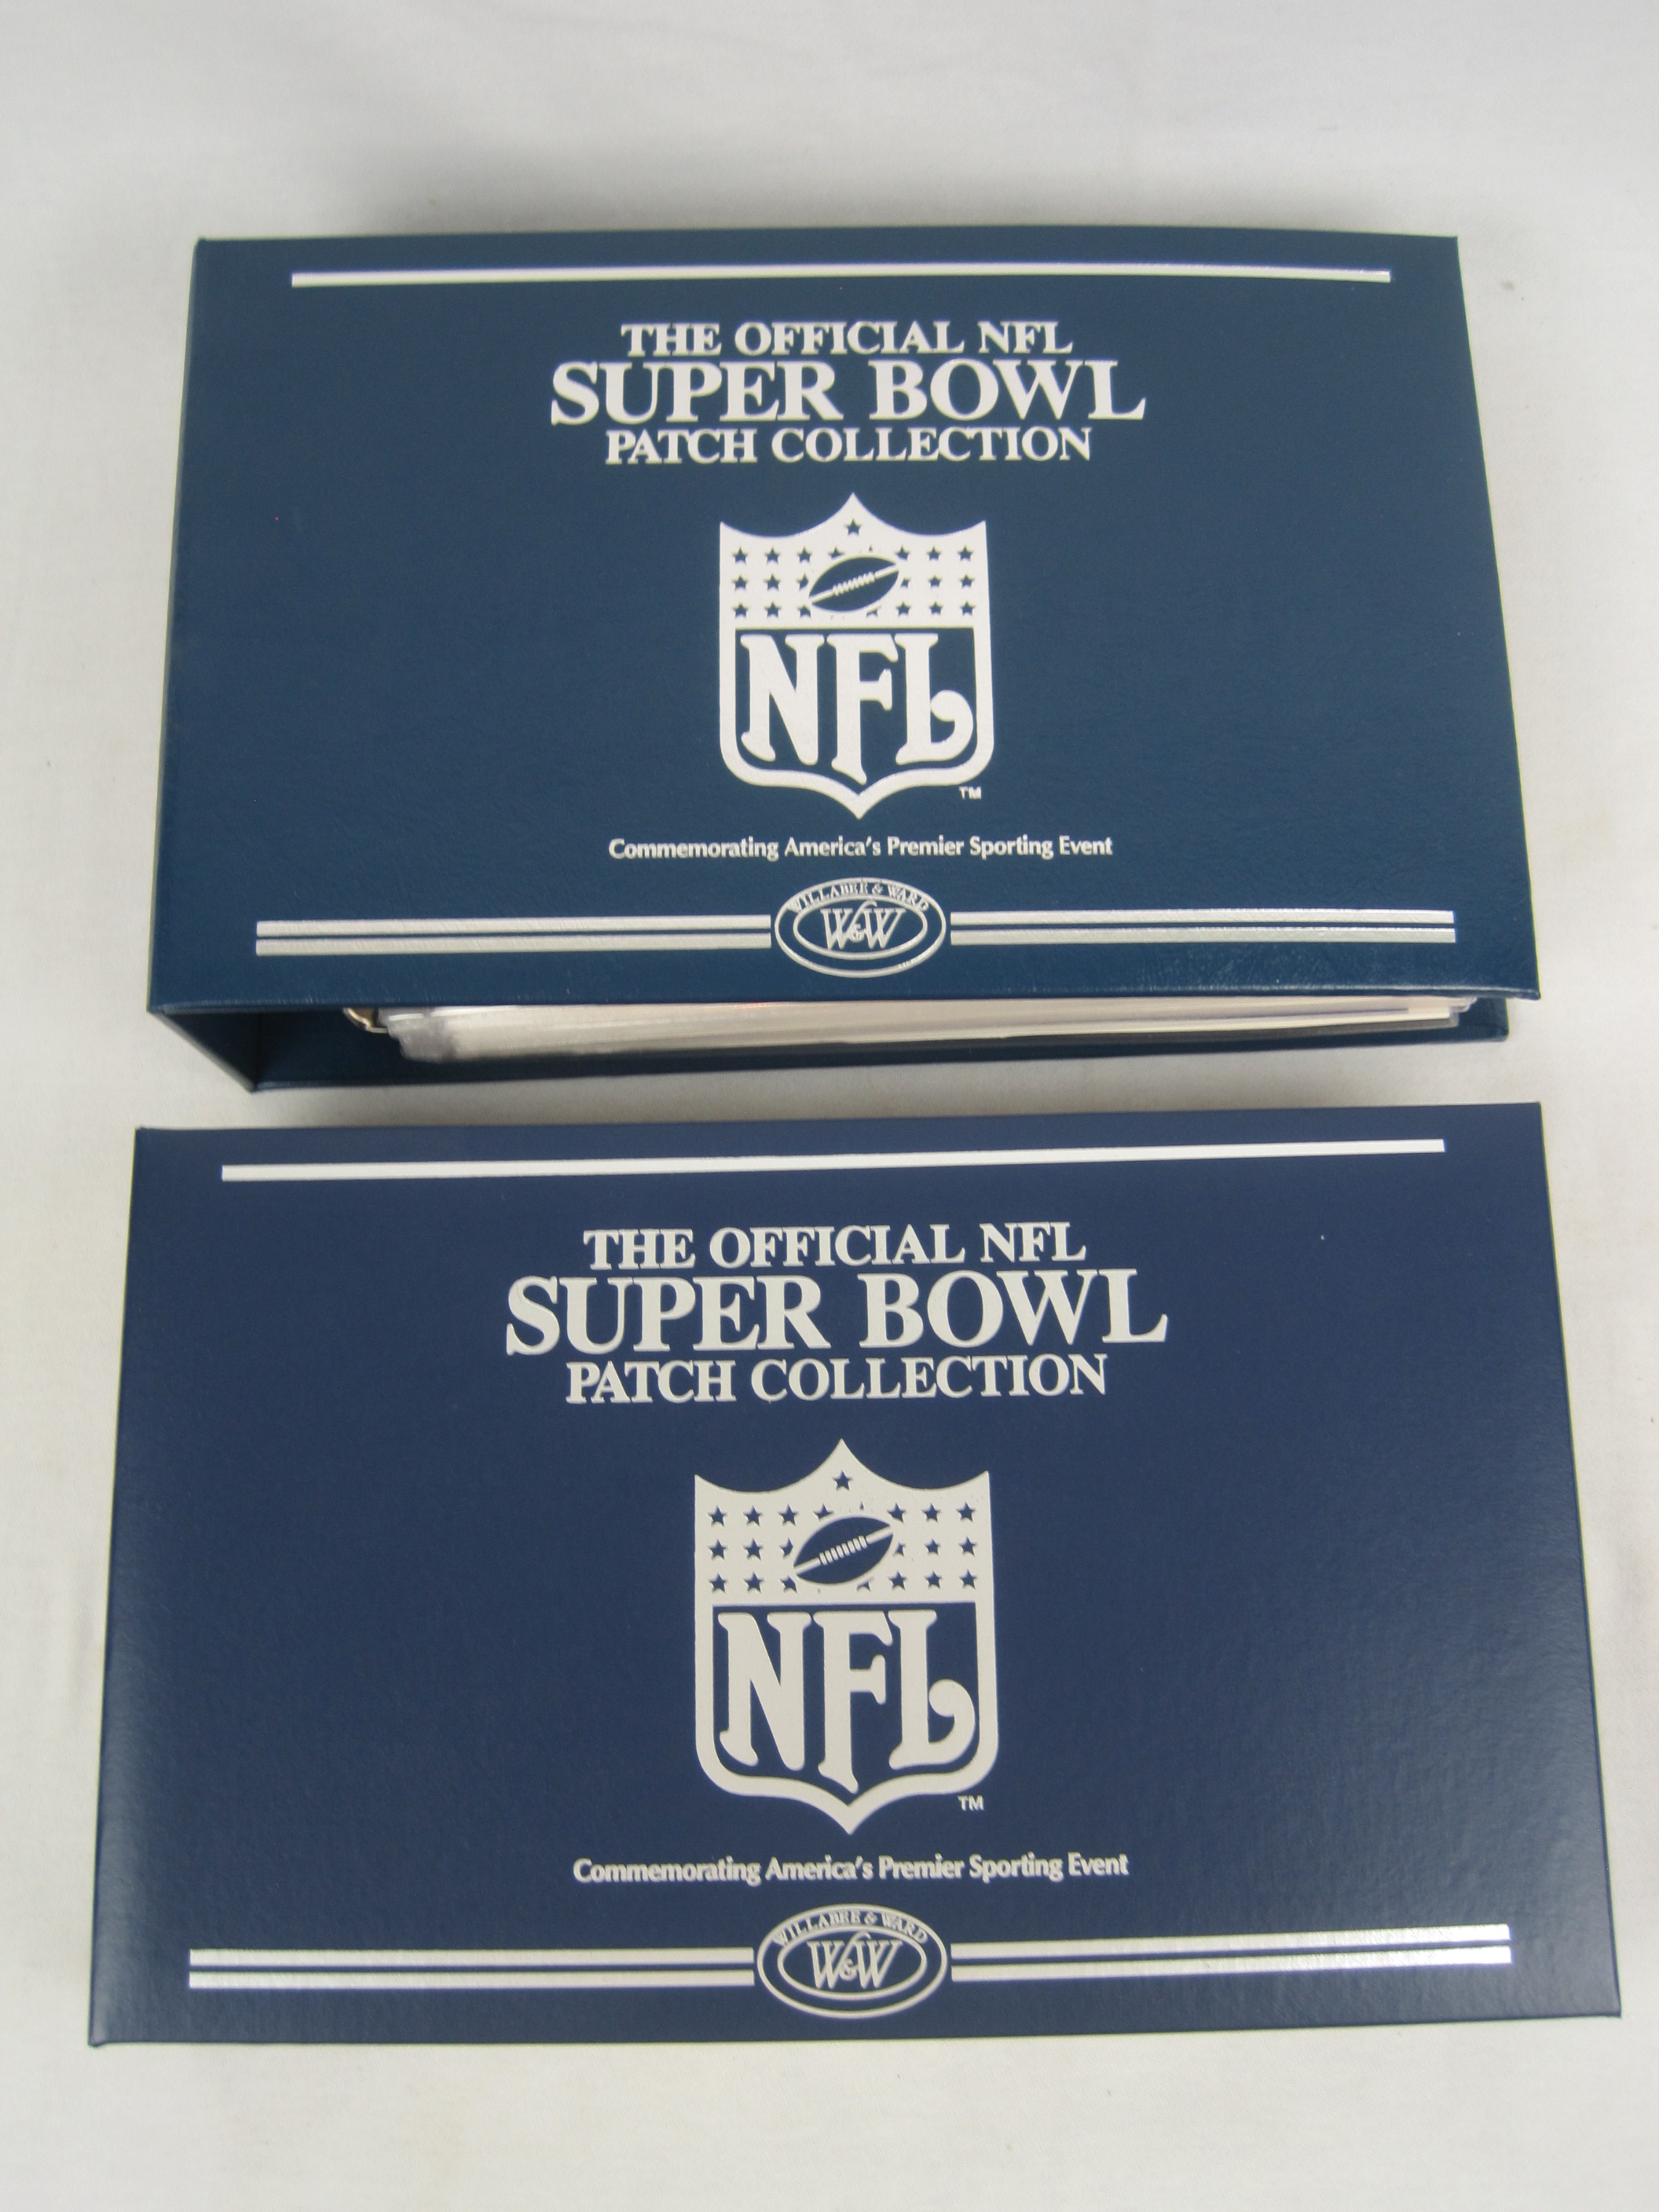 Sold at Auction: NFL Super Bowl Patch Collection 1-55